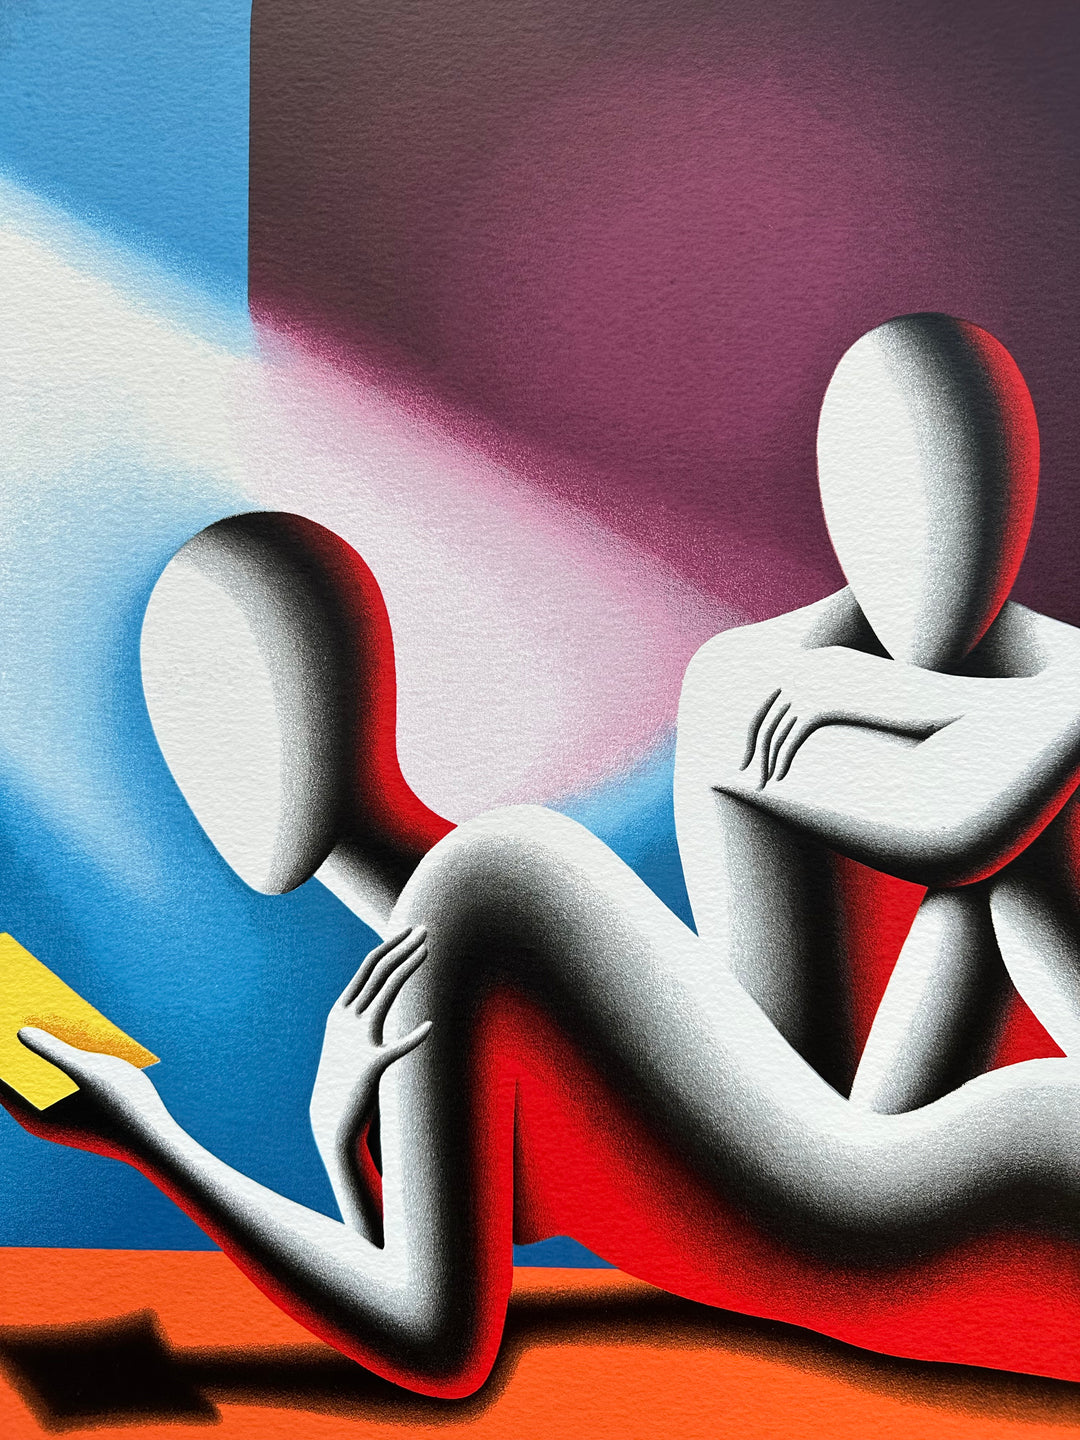 One moment in time | Mark Kostabi